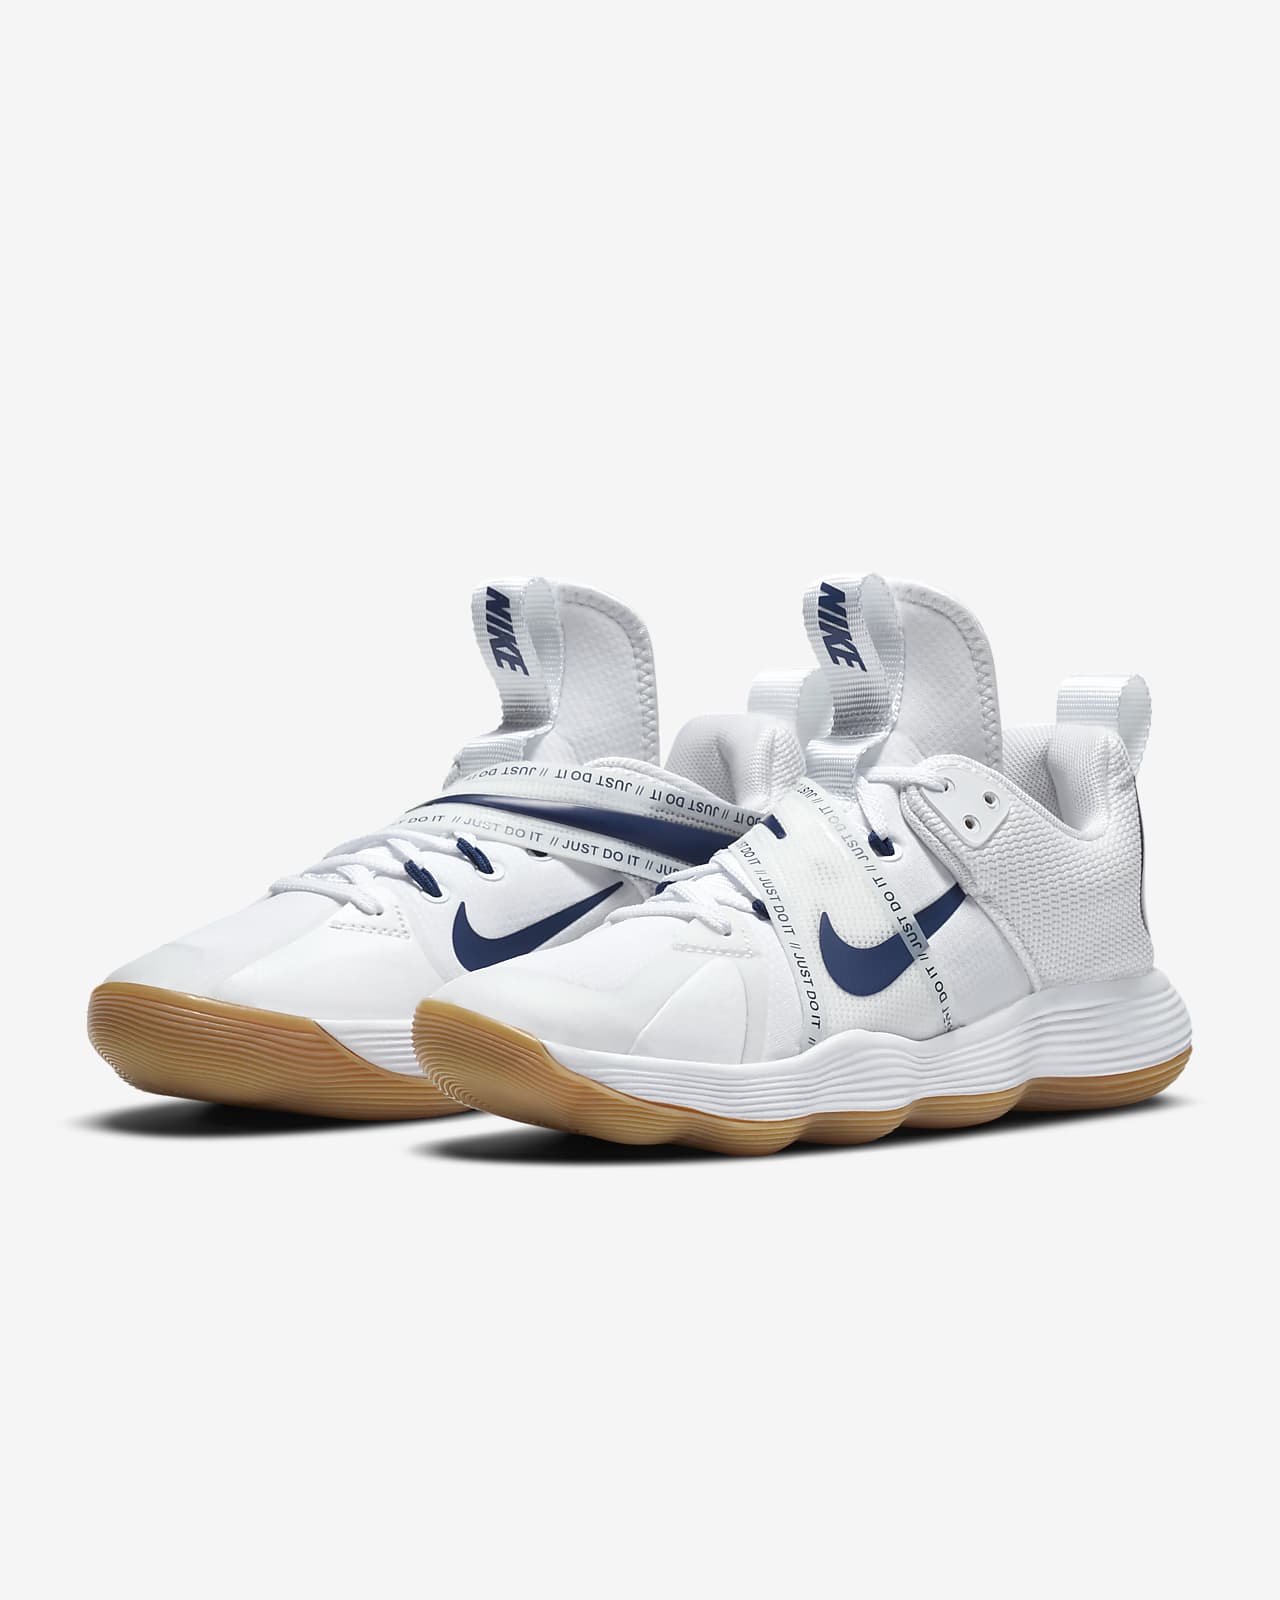 nike react volleyball shoes